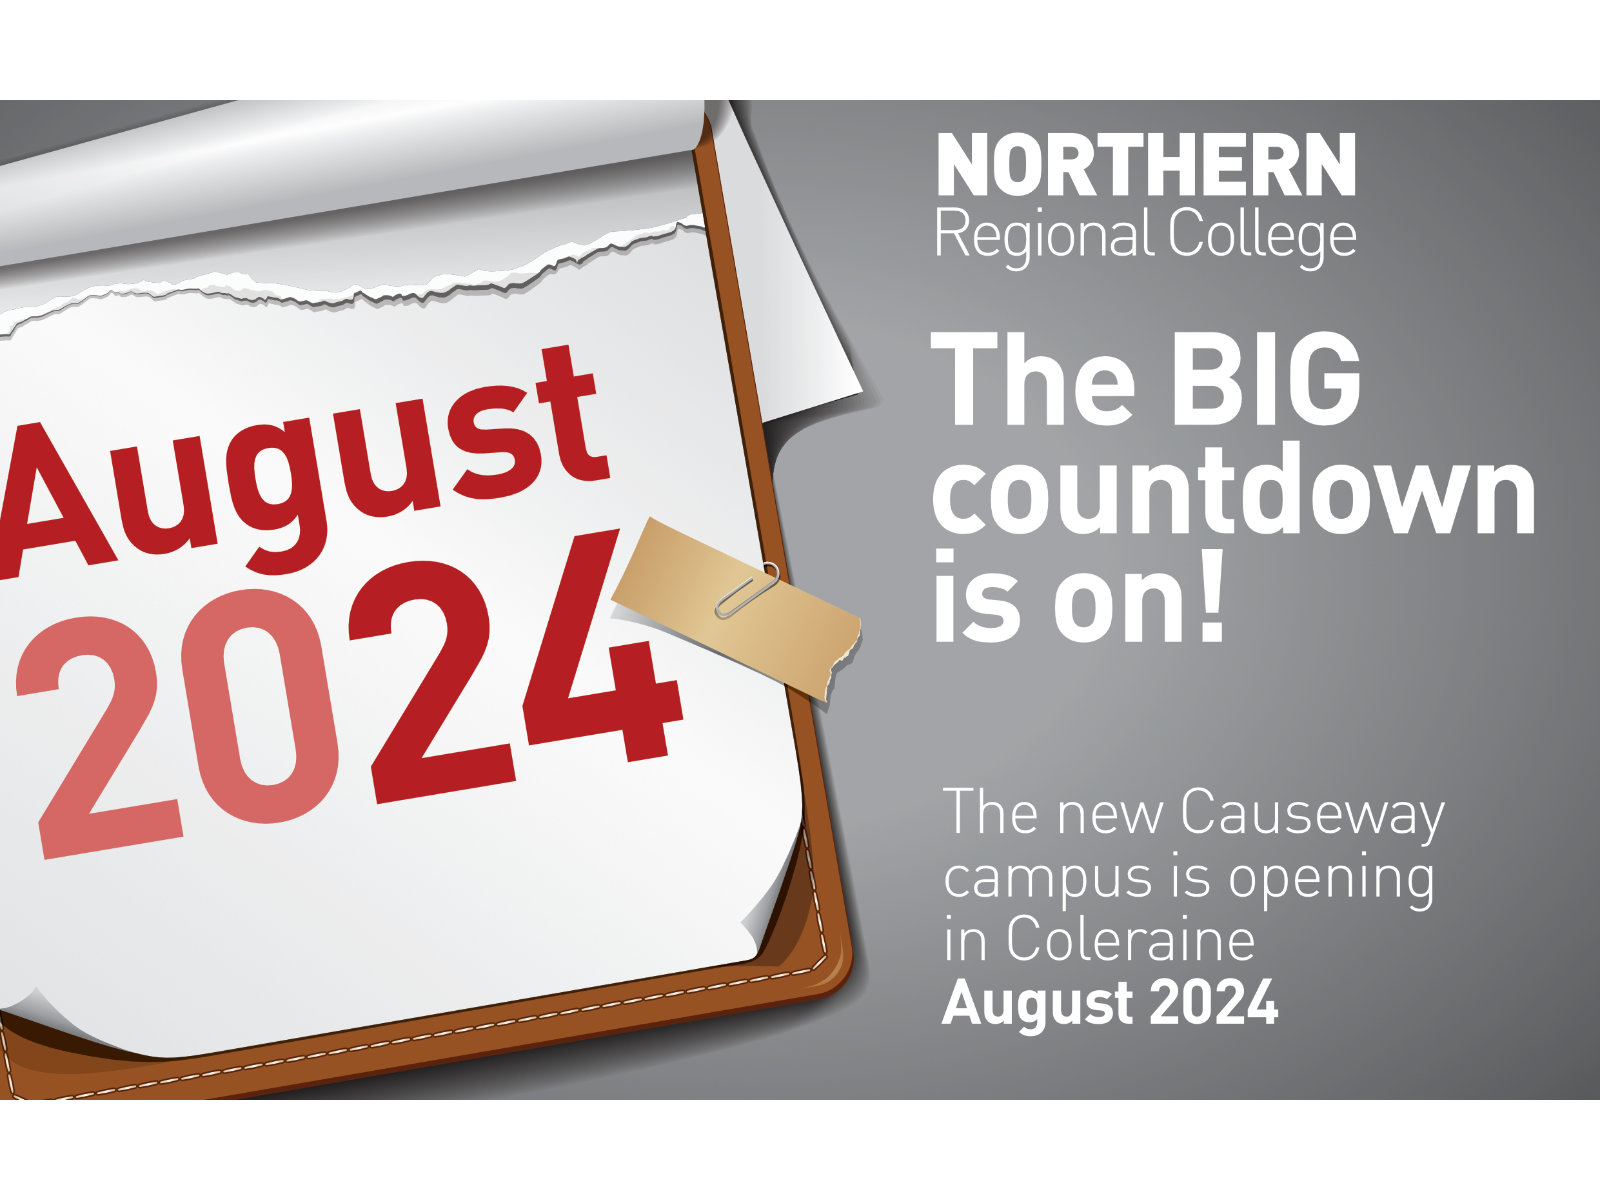 The BIG countdown is on! The new Causeway campus is opening in COleraine August 2024